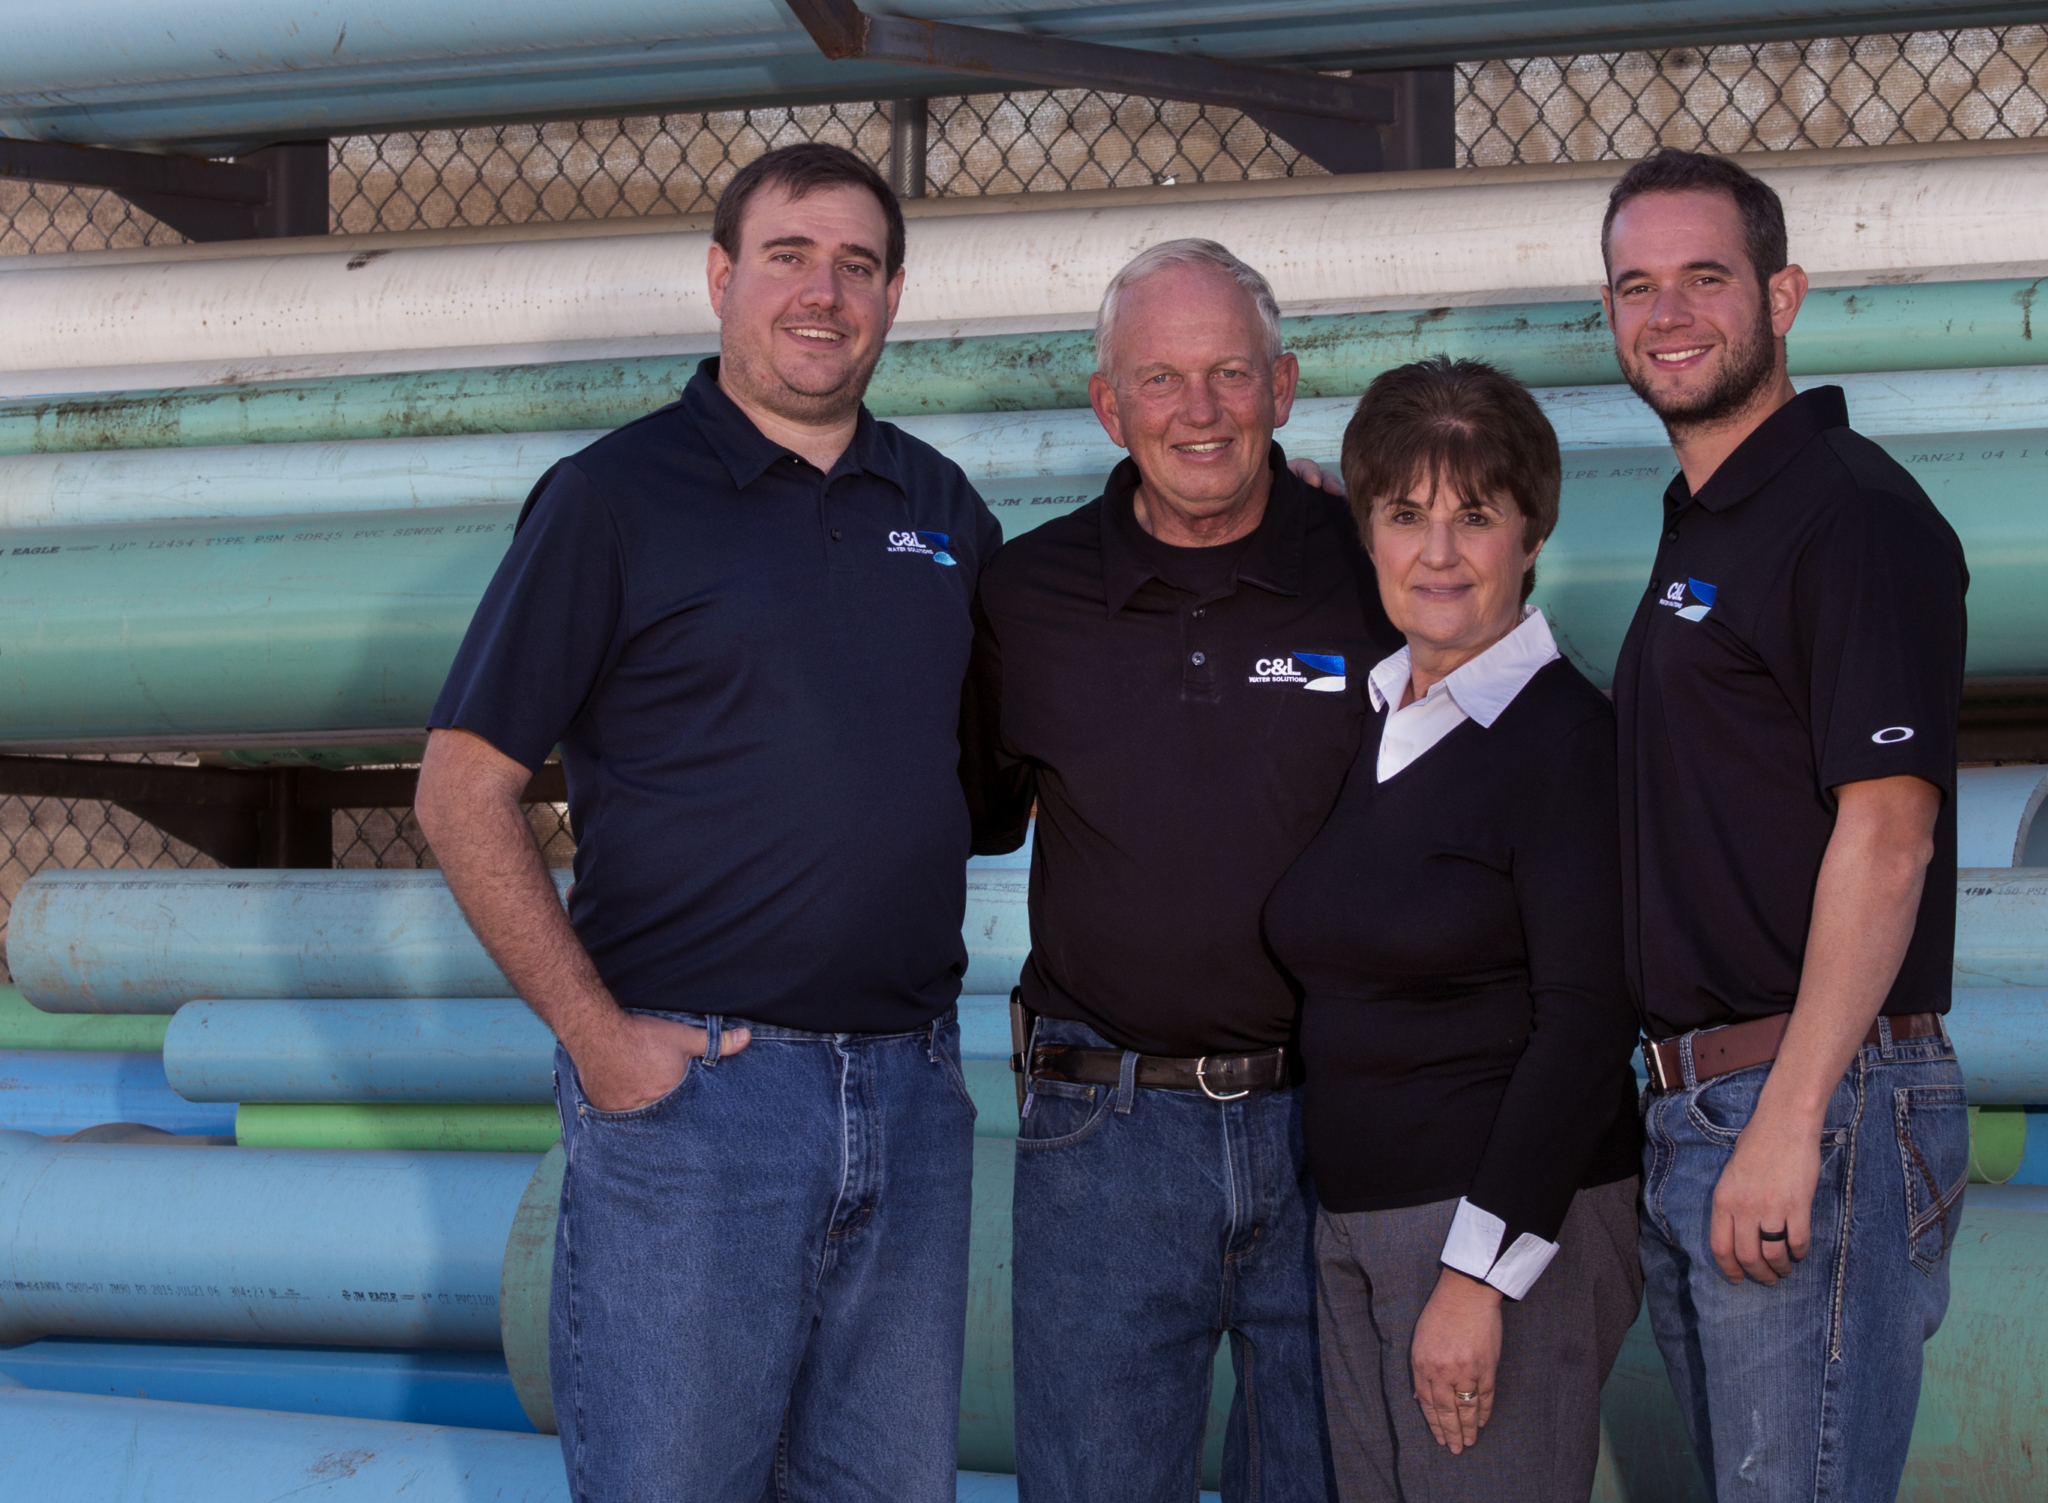 Larry and Chrystalla Larson (middle), founders of C&L Water Solutions in Littleton, Colorado, alongside sons Jason and Chris, who now run the company.